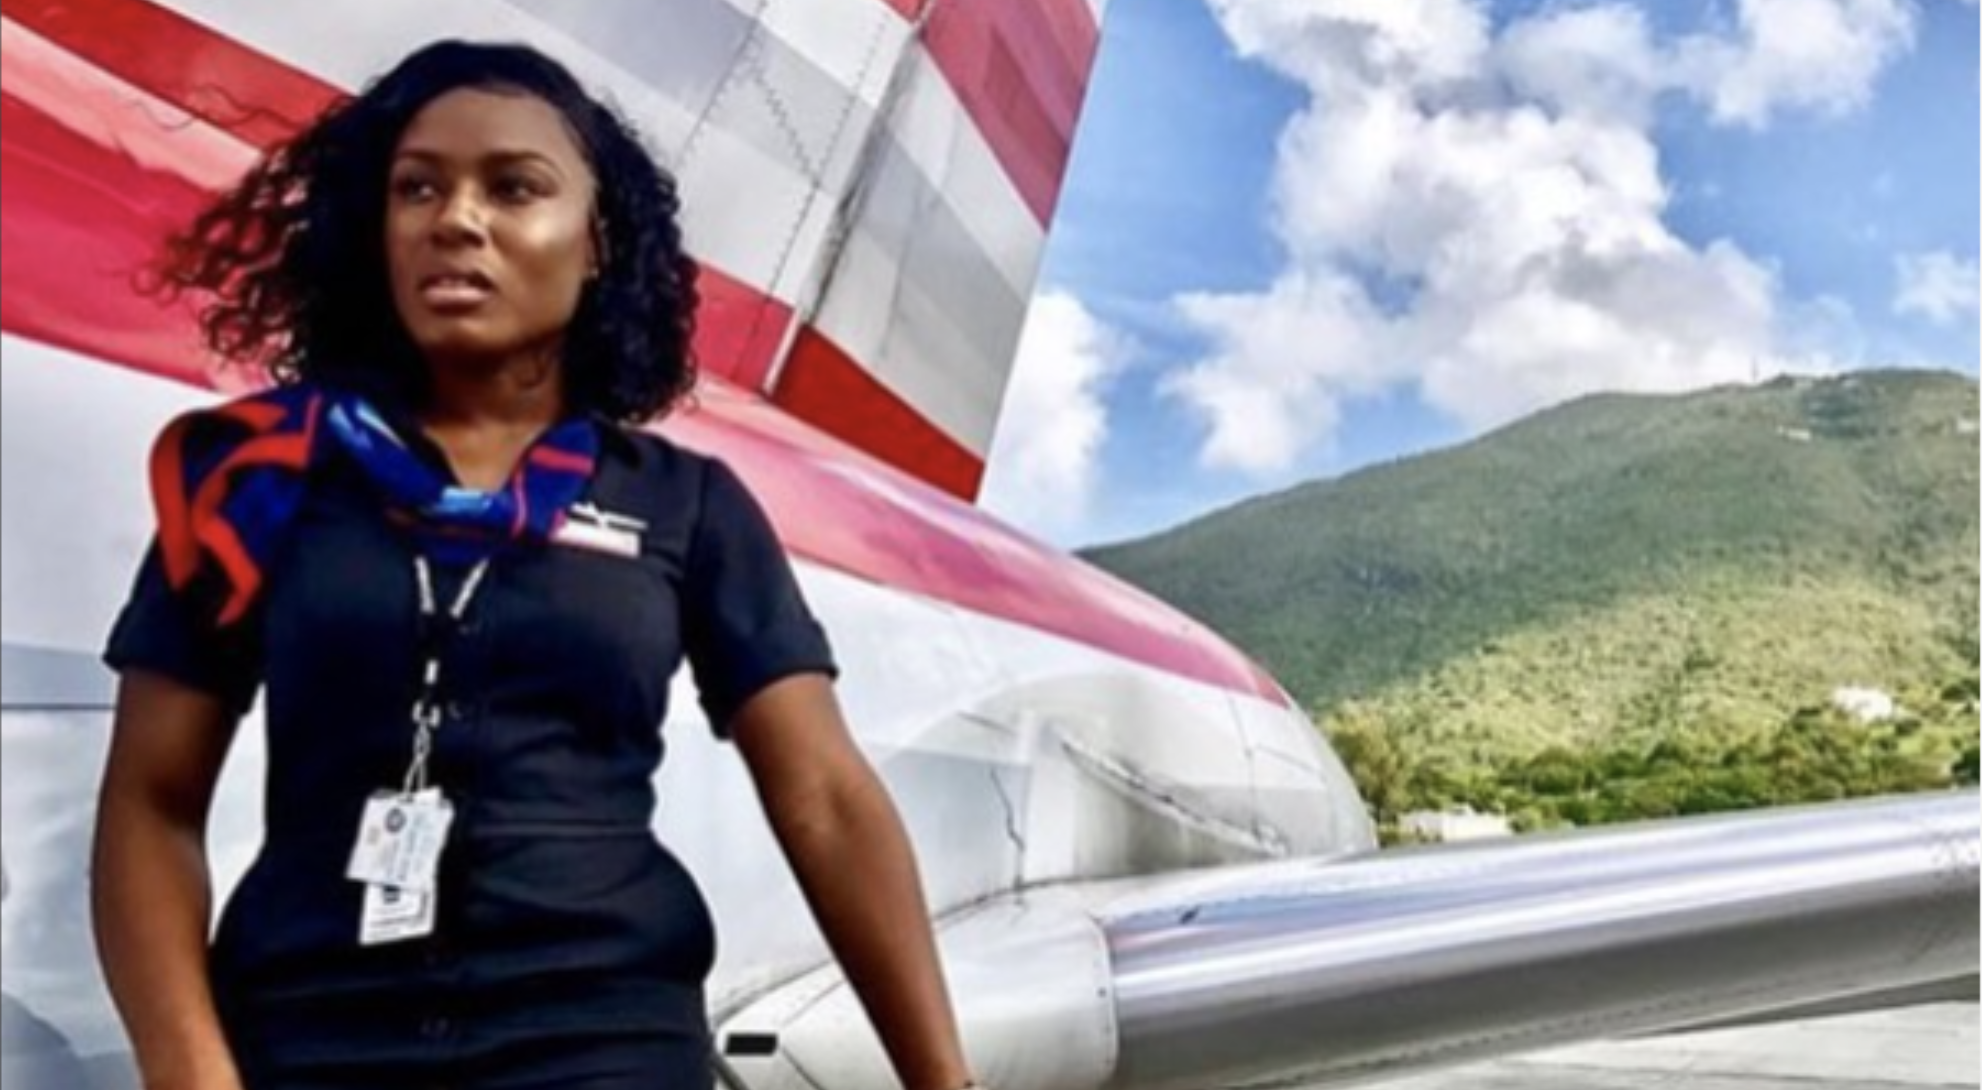 What No One Tells You About Being A Flight Attendant